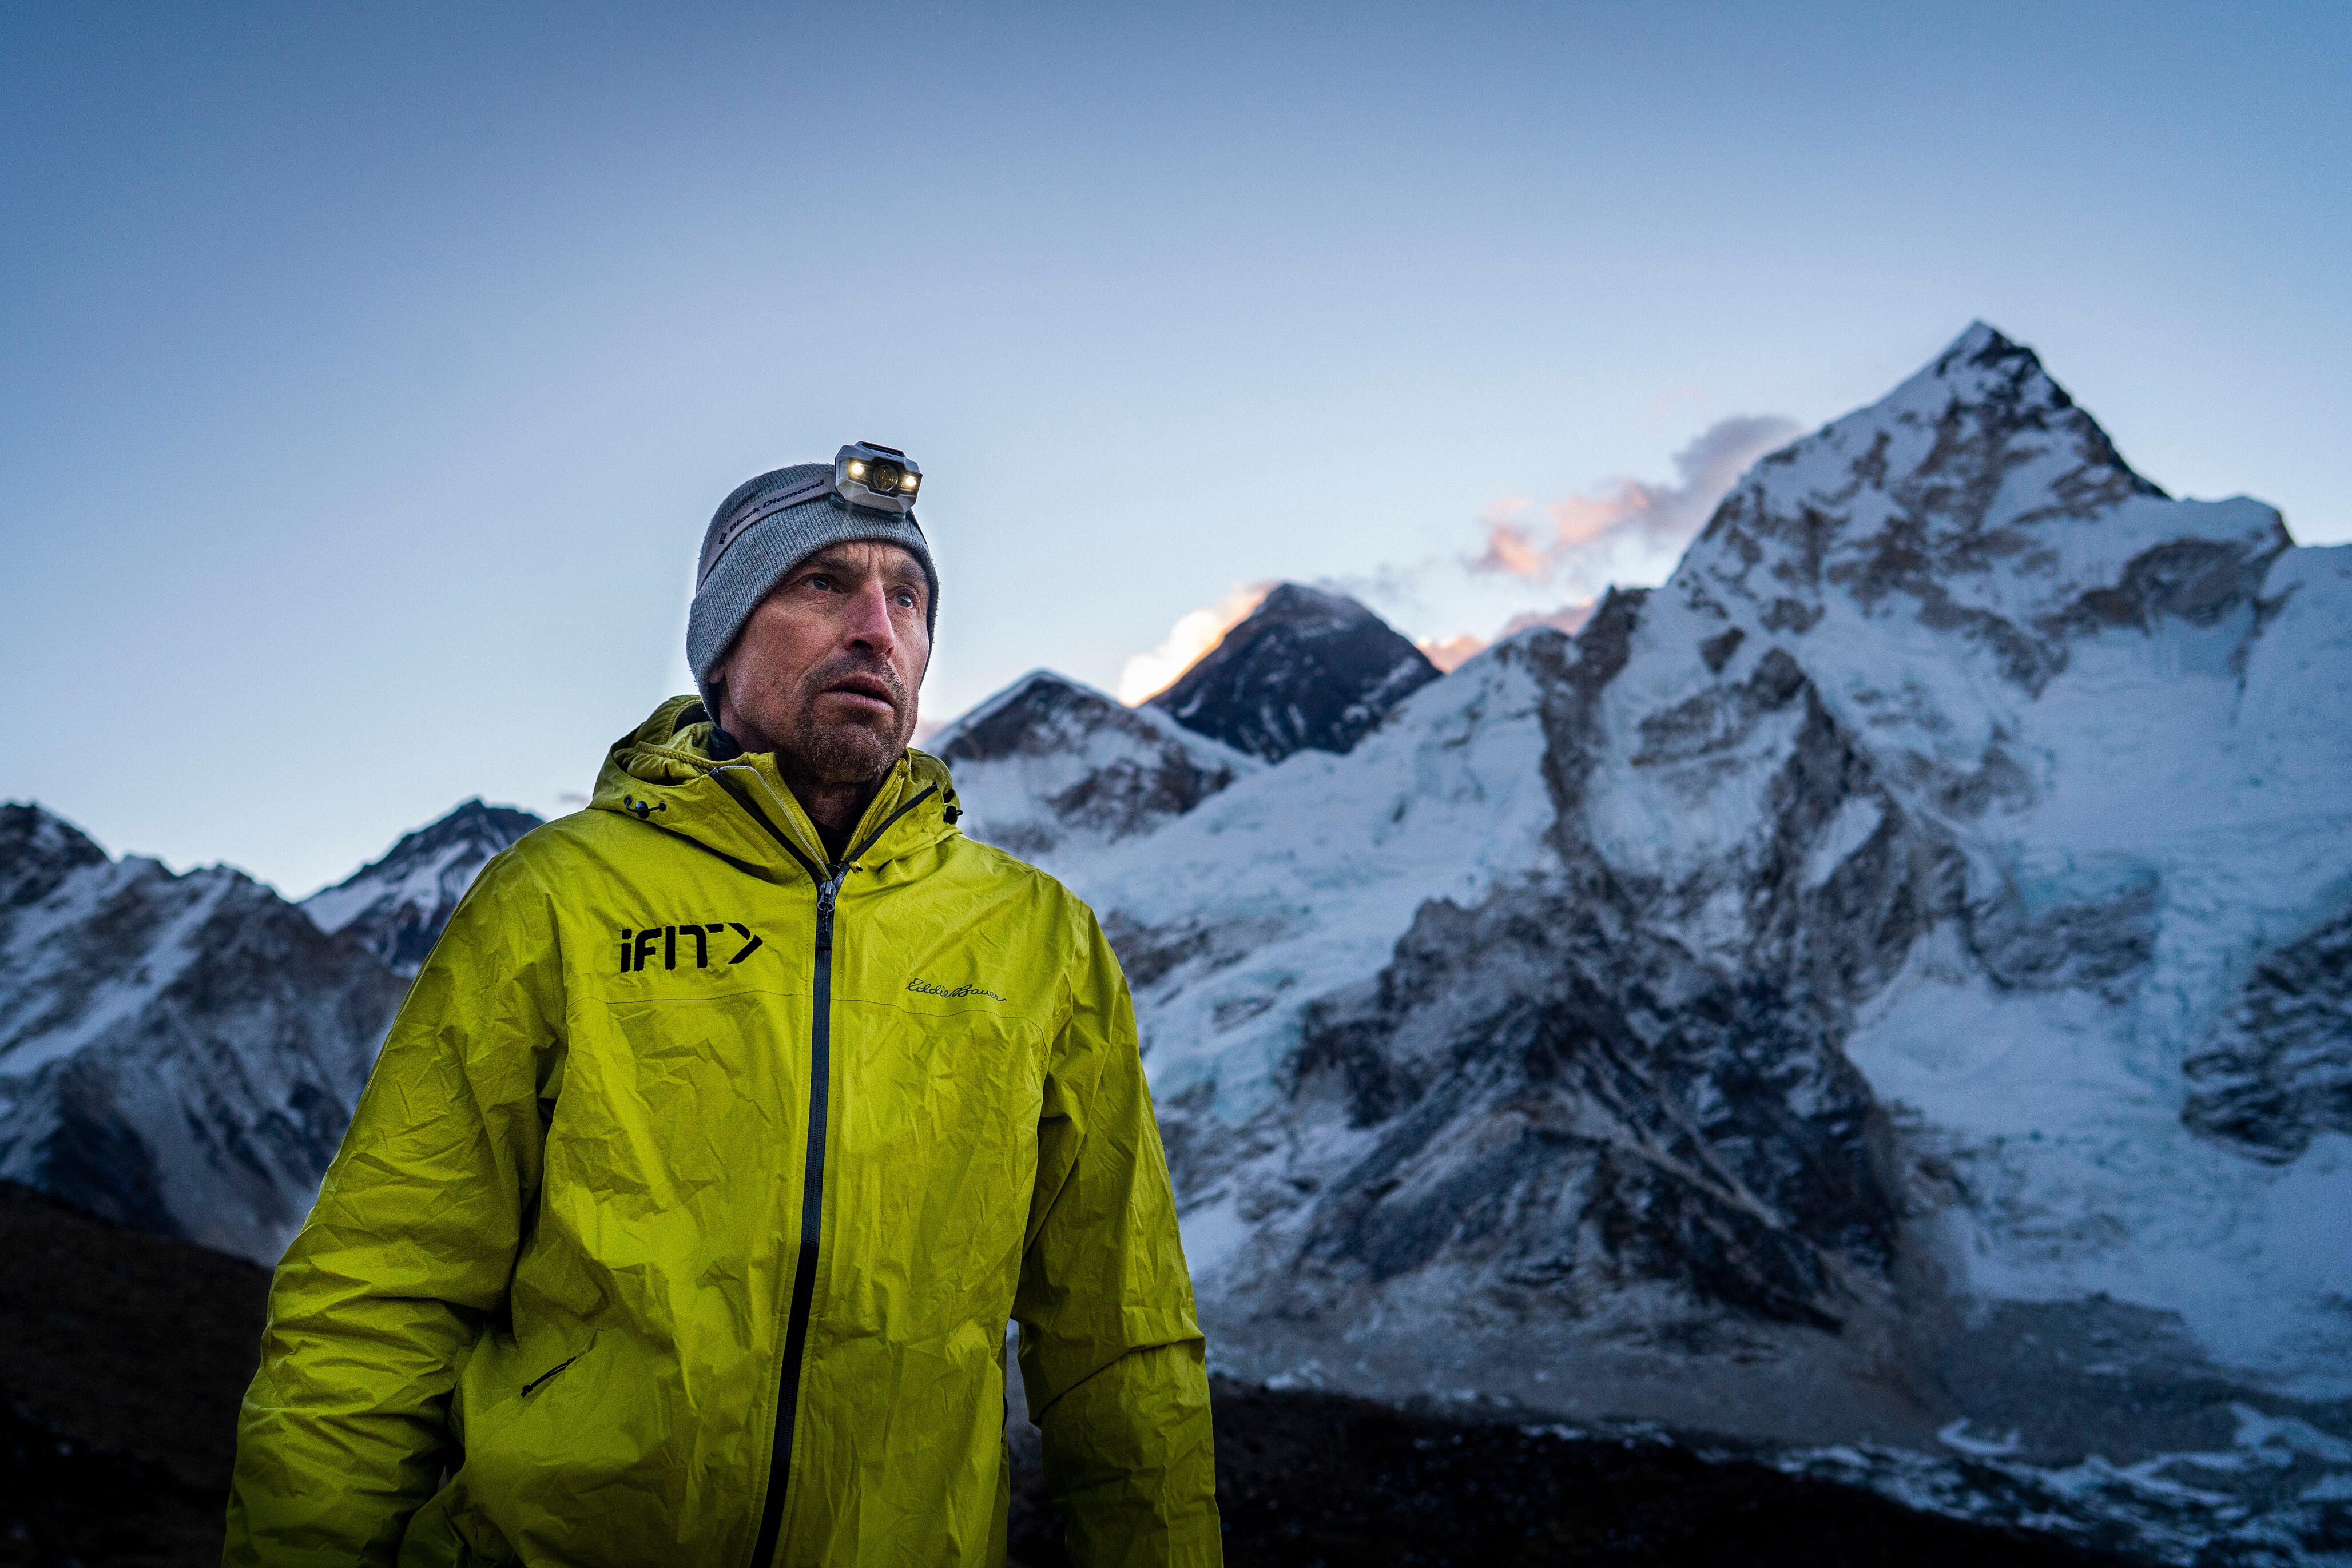 Adventure photography on the trail to Mount Everest.  Photographing avid adventurer Kenton Cool, one of the world’s leading high-altitude climbers.